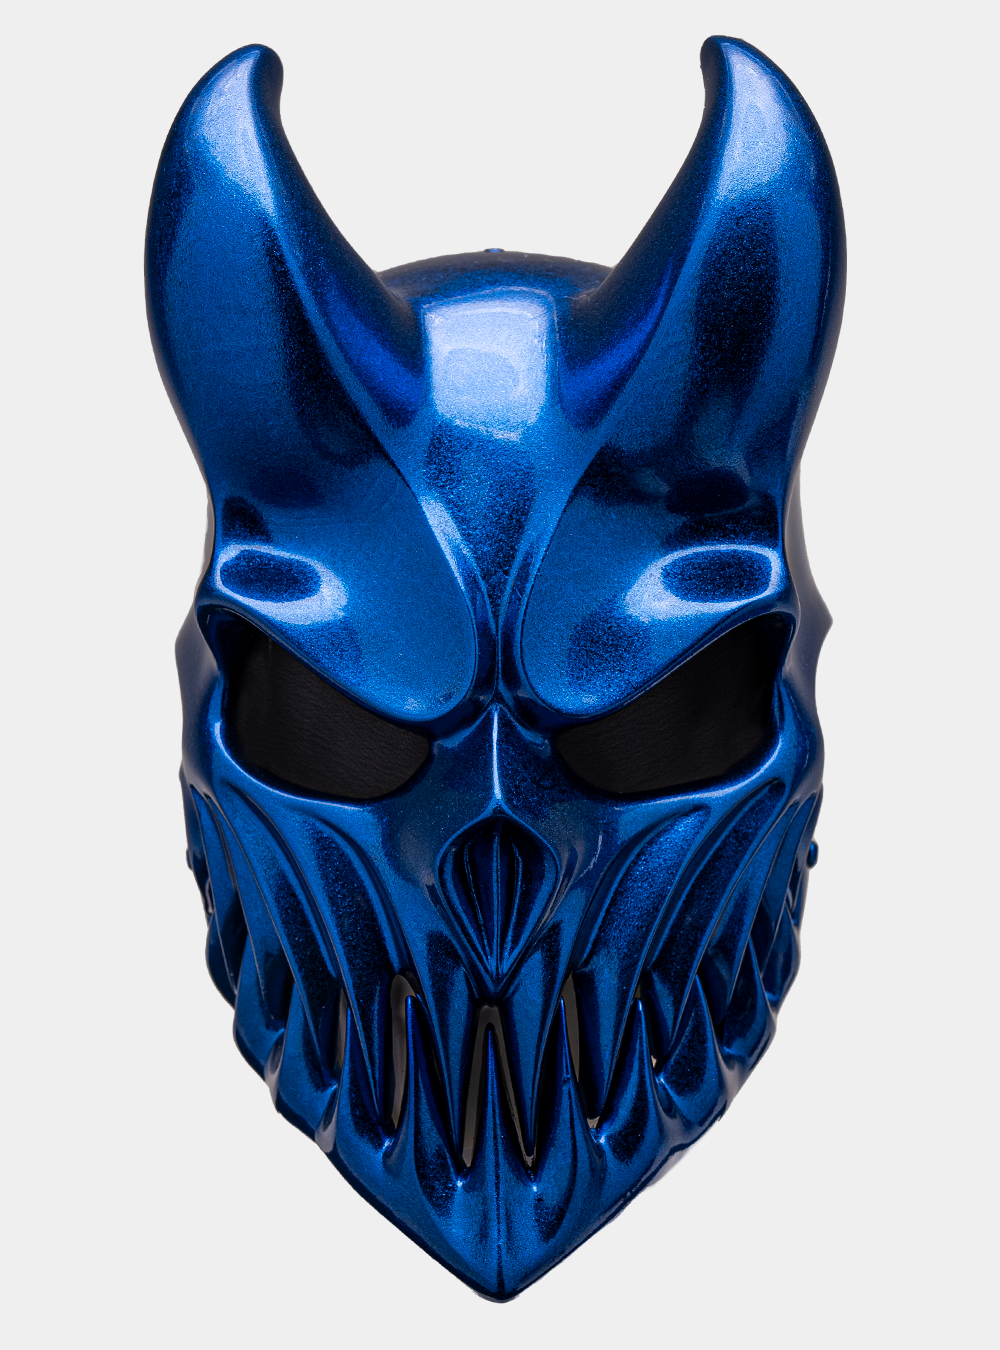 (SLAUGHTER TO PREVAIL) ALEX TERRIBLE MASK “KID OF DARKNESS” (ULTRAMARINE BLUE)